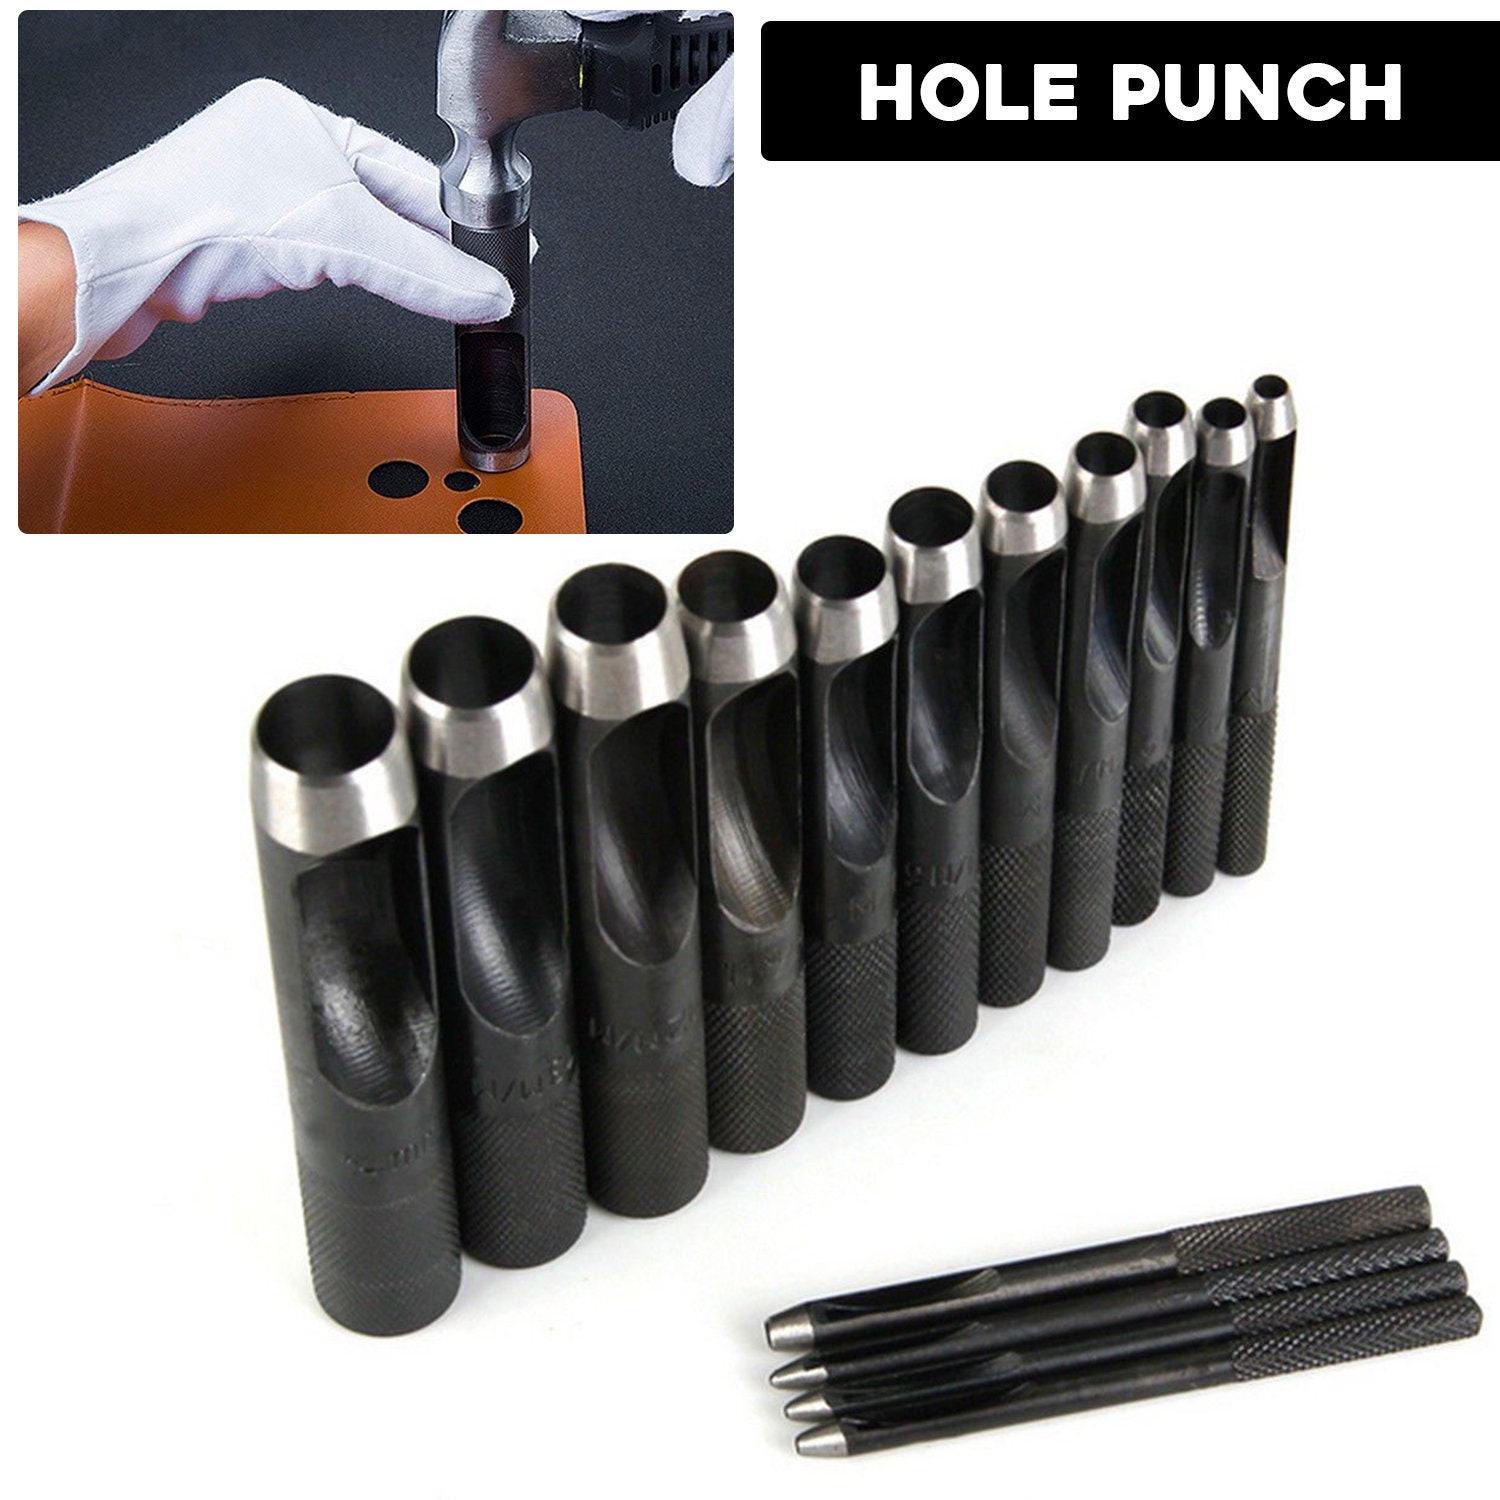 0.5mm-1.8mm Mini Hole Puncher Hole Cutting Punch Hollow Punch Tool Hole  Maker for Leather Crafts Leather Tool Hole Punch 